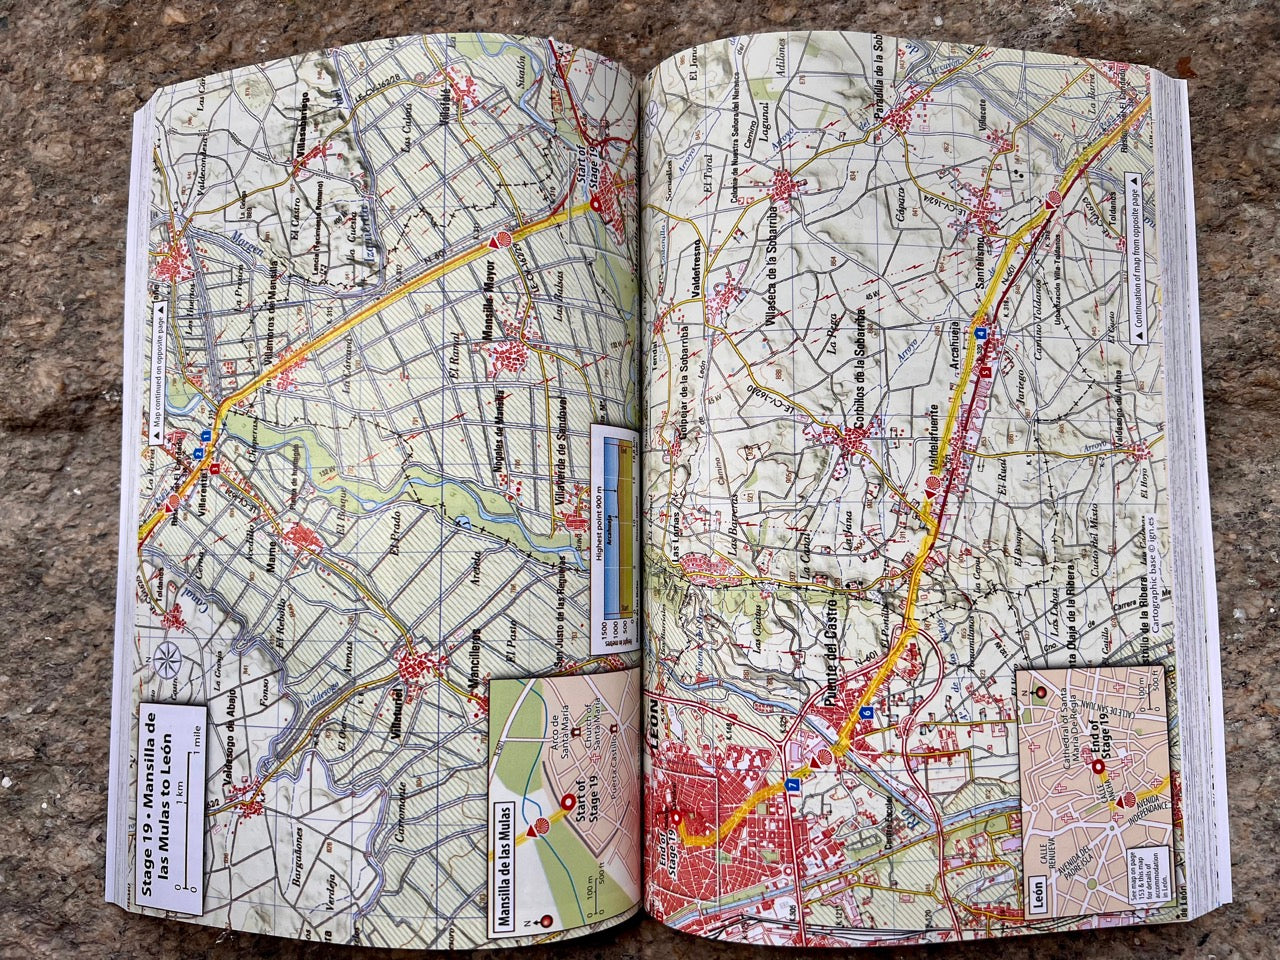 "A Pilgrims Guide to Northern Spain, Camino Francés & Camino Finisterre" by Andrew Houseley